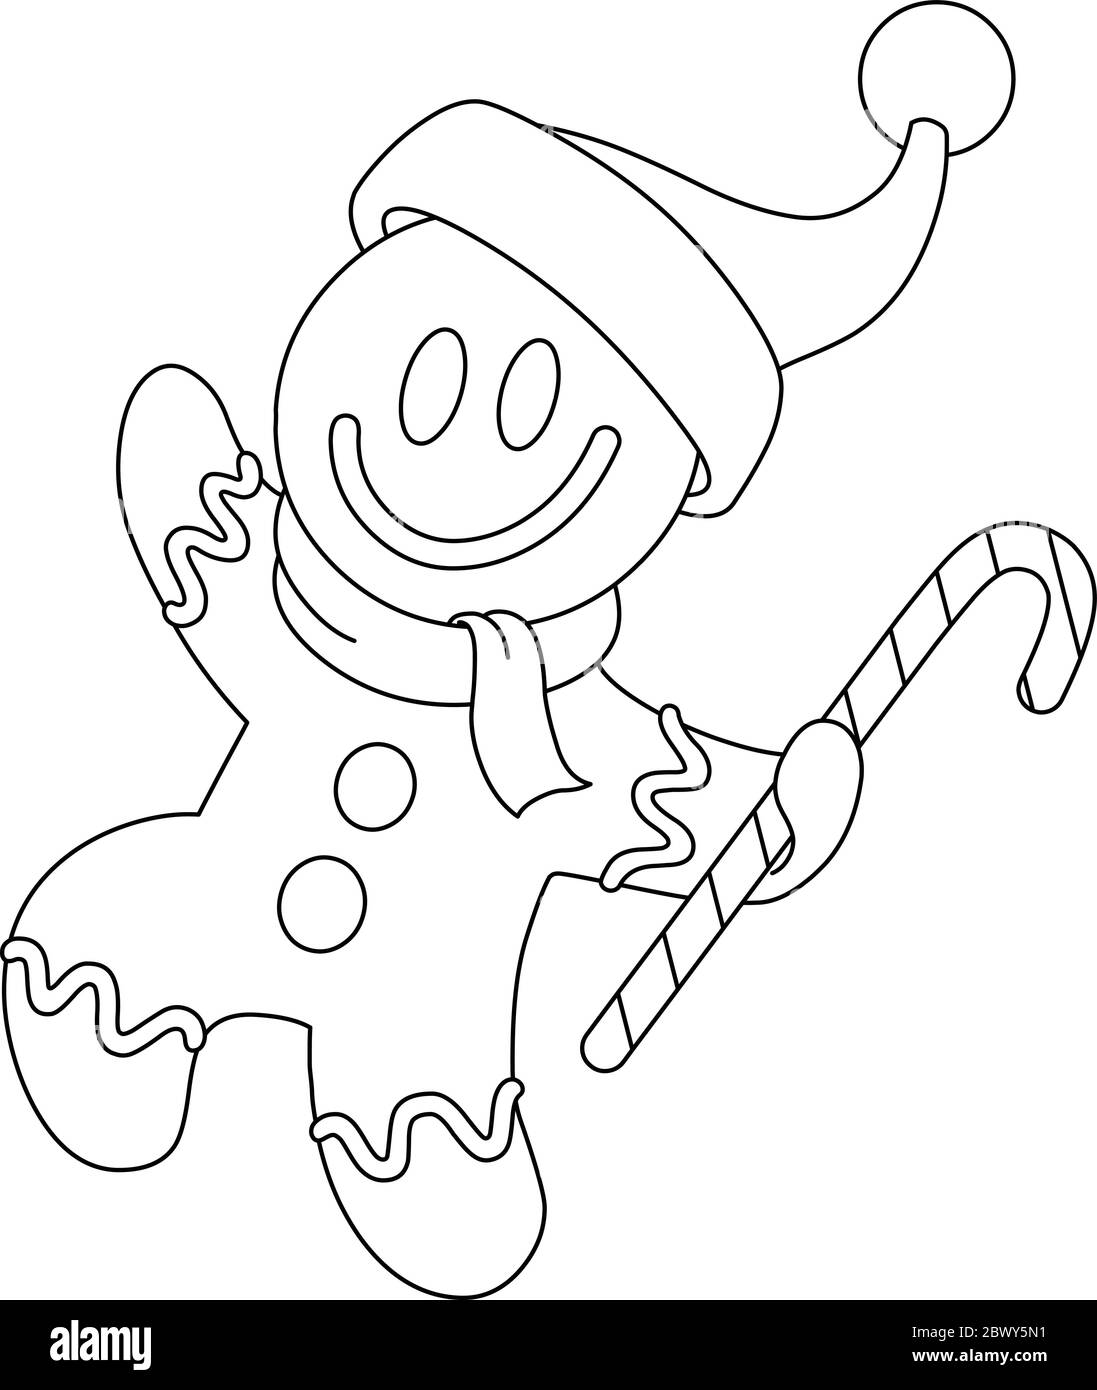 Happy Christmas gingerbread man wearing Santa hat and holding a candy cane. Vector line art illustration coloring page. Stock Vector